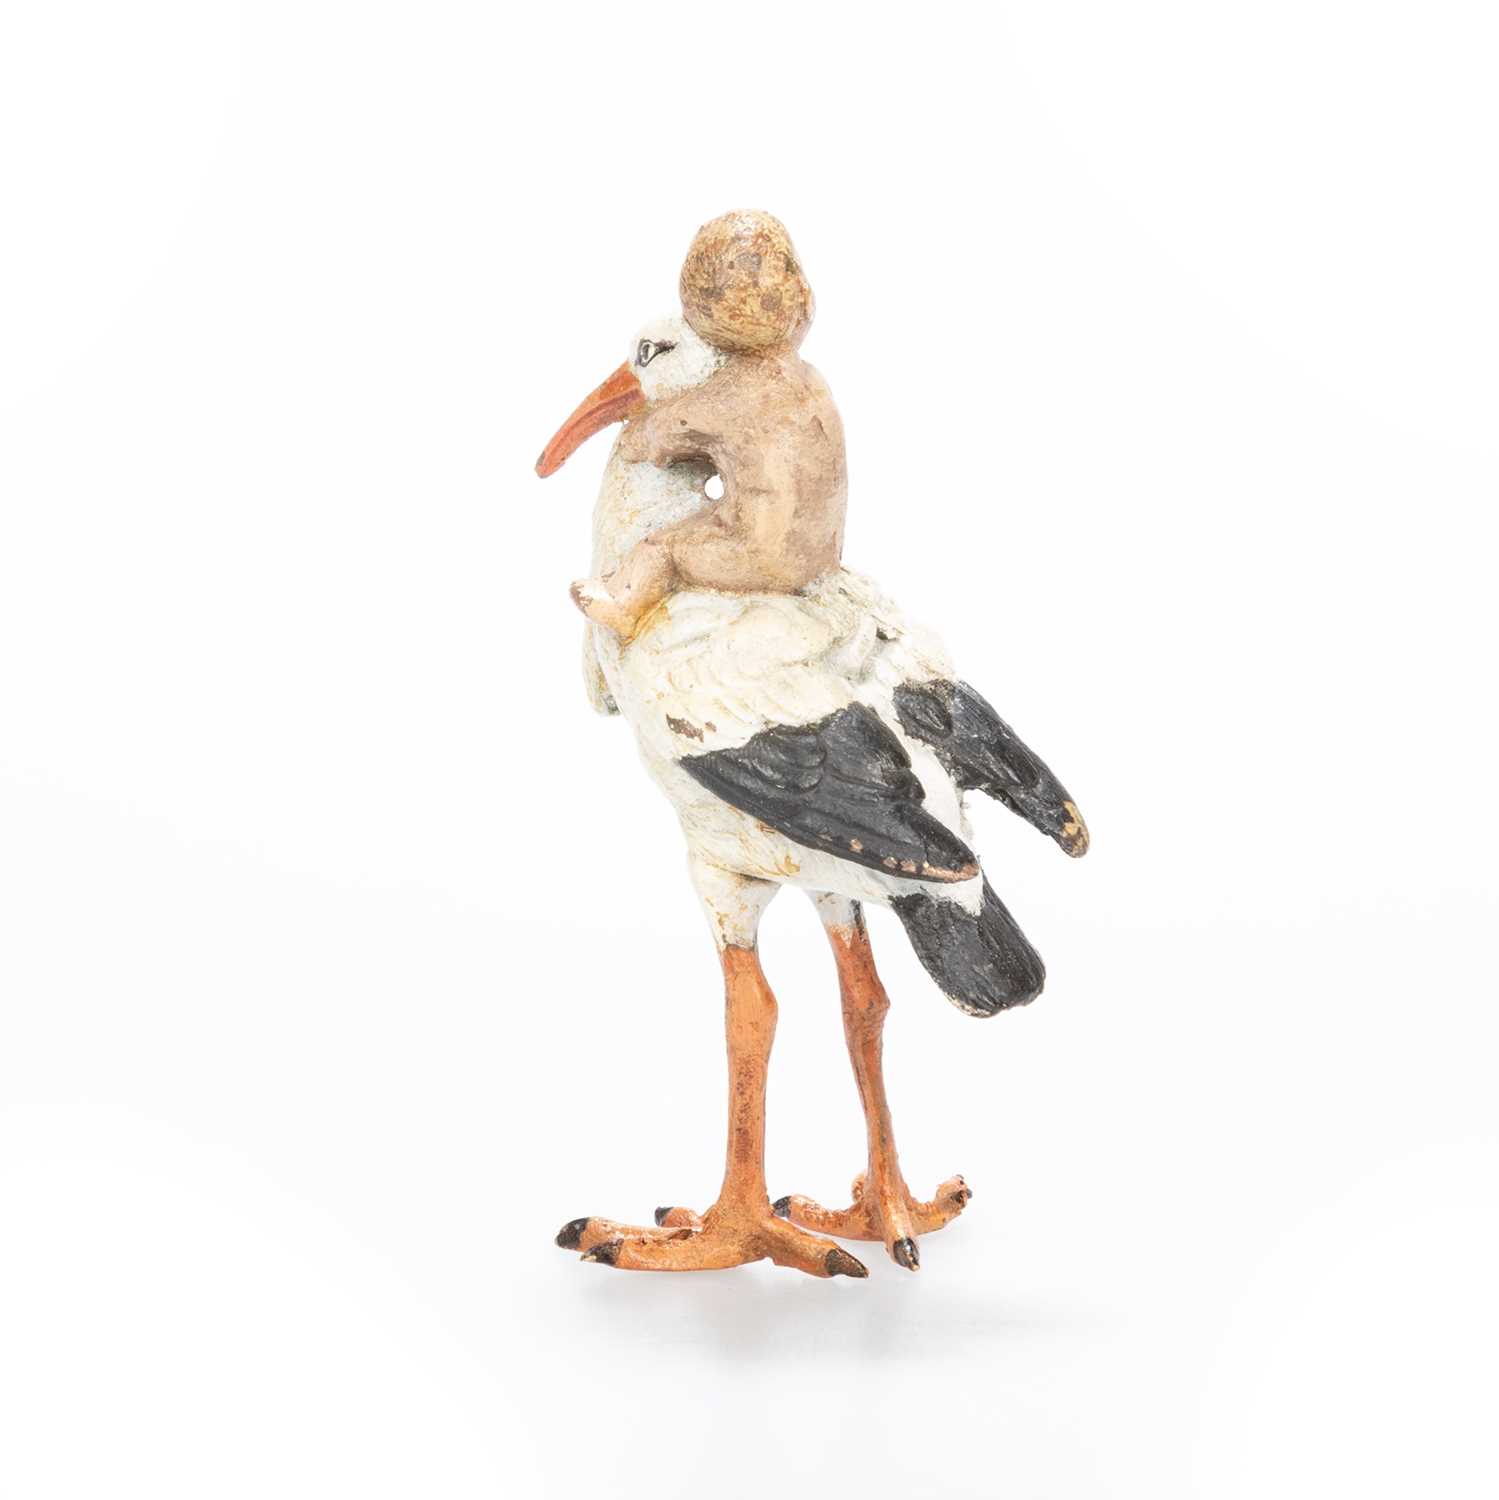 A COLD PAINTED BRONZE MODEL OF A BABY-BEARING STORK - Image 2 of 2